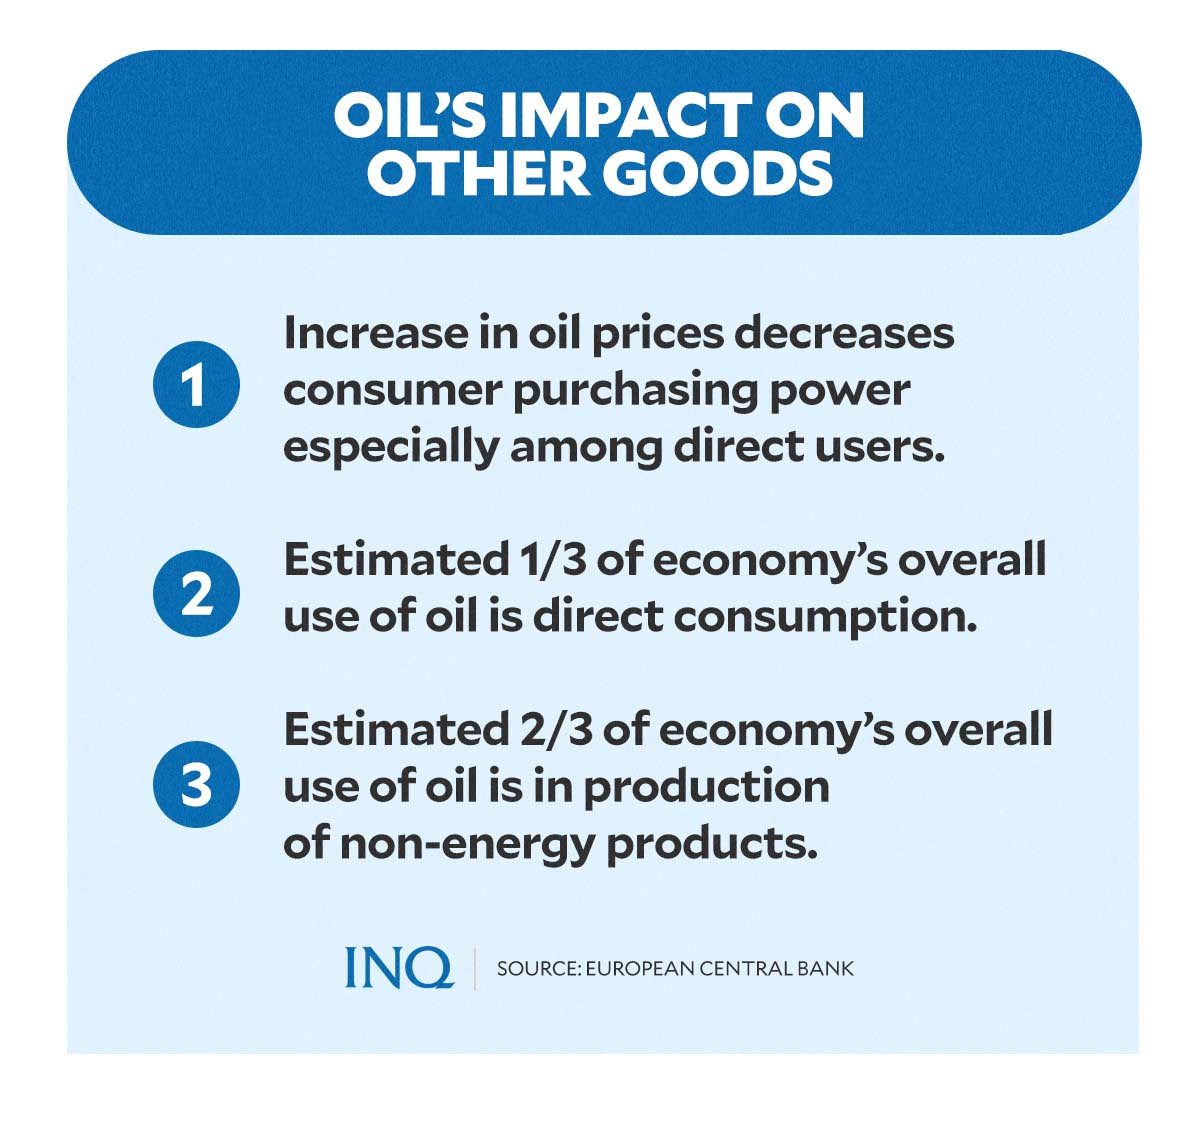 oil's impact on other goods